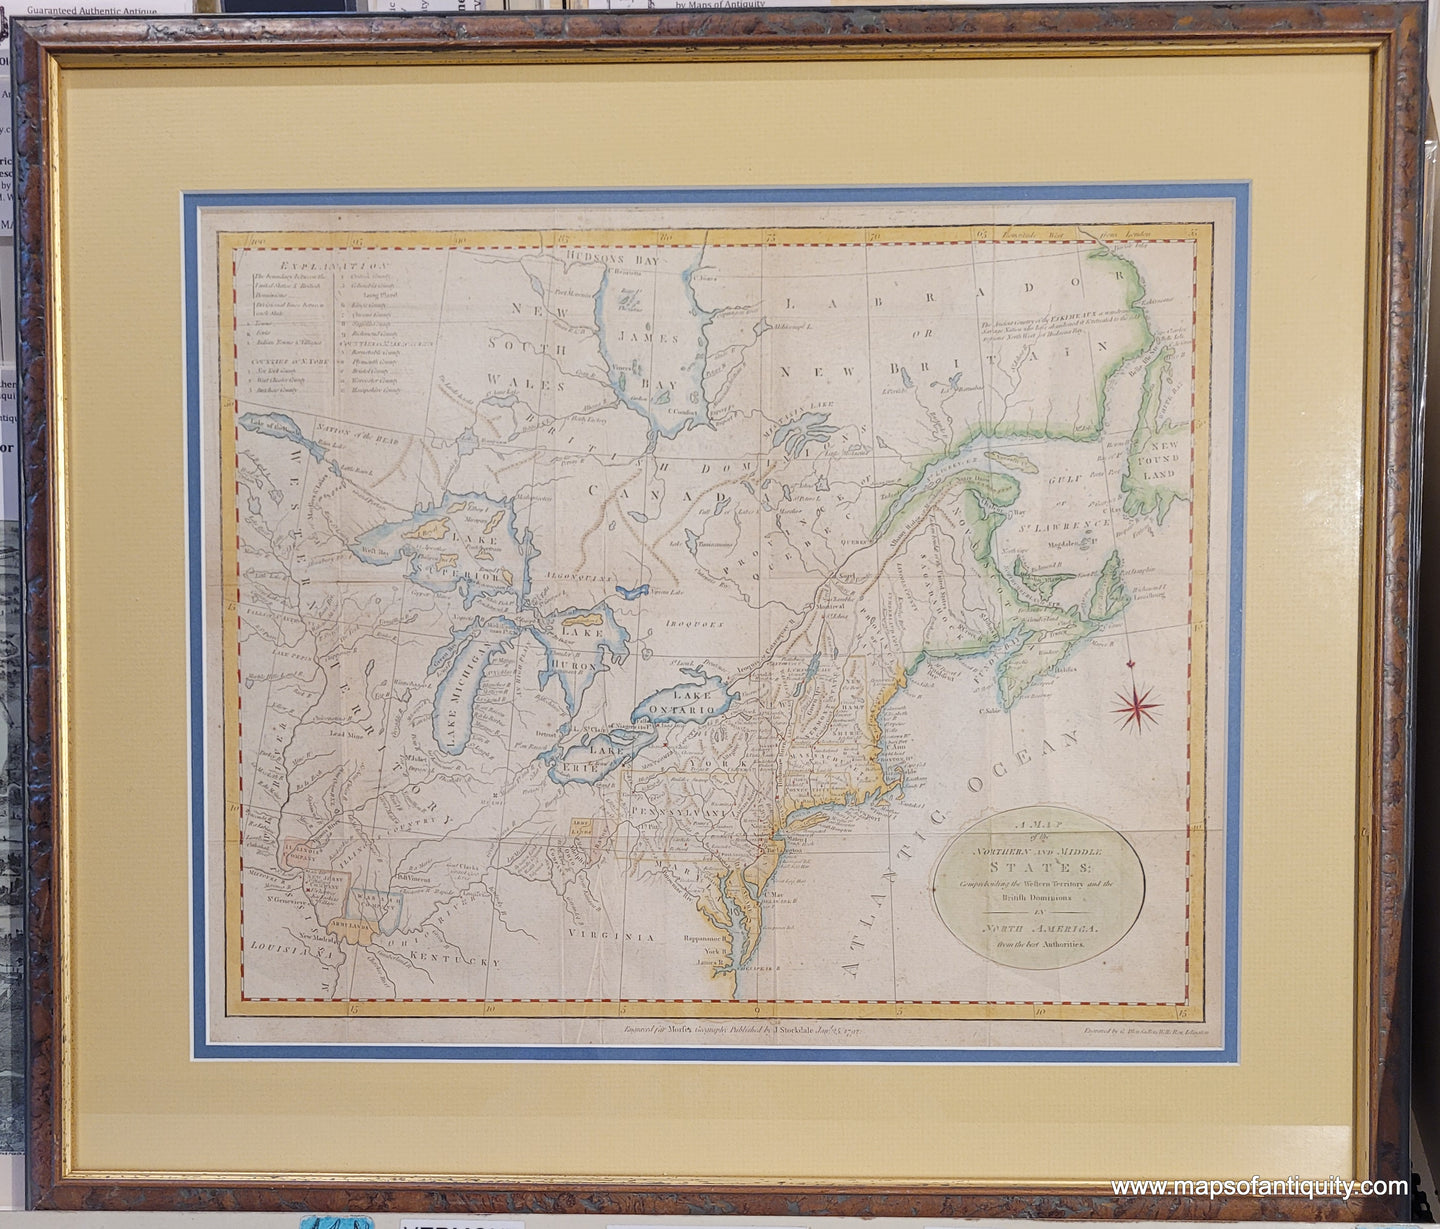 Antique-hand-colored-framed-Map-A-Map-of-the-Northern-&-Middle-States;-Comprehending-the-Western-Territory-&-the-British-Dominions-in-north-America.-From-the-Best-Authorities.-North-America--1792-Morse-Maps-Of-Antiquity-1800s-19th-century